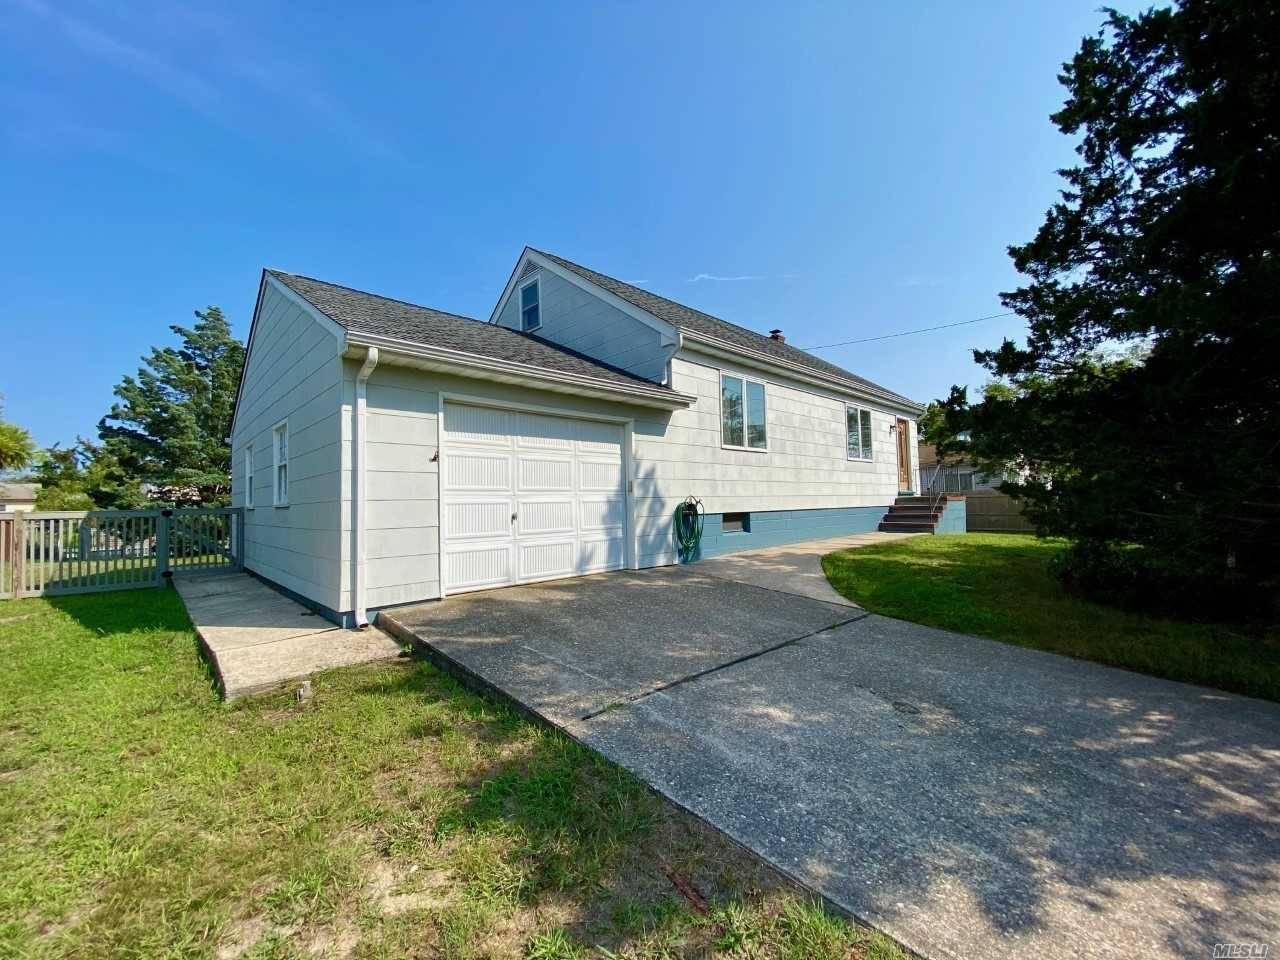 This two bedroom, one bath ranch located in Shinnecock Shores on 75 ft of bulkheaded waterfront with dock right in your backyard and is ready for your Kayak, Canoe, Paddle ...